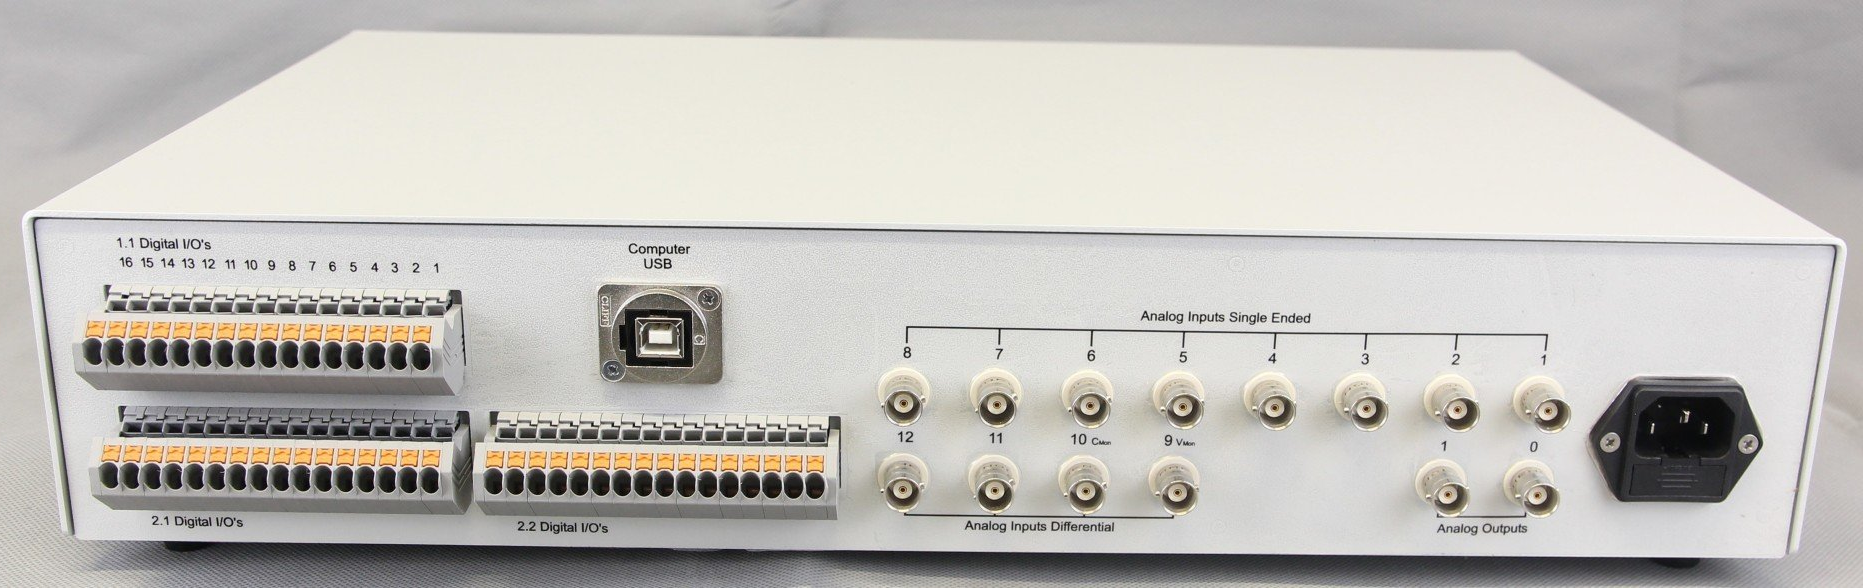 Gallery 400 - 6361, 2-Ch, 2.8MS/s, AnyWave Control Unit